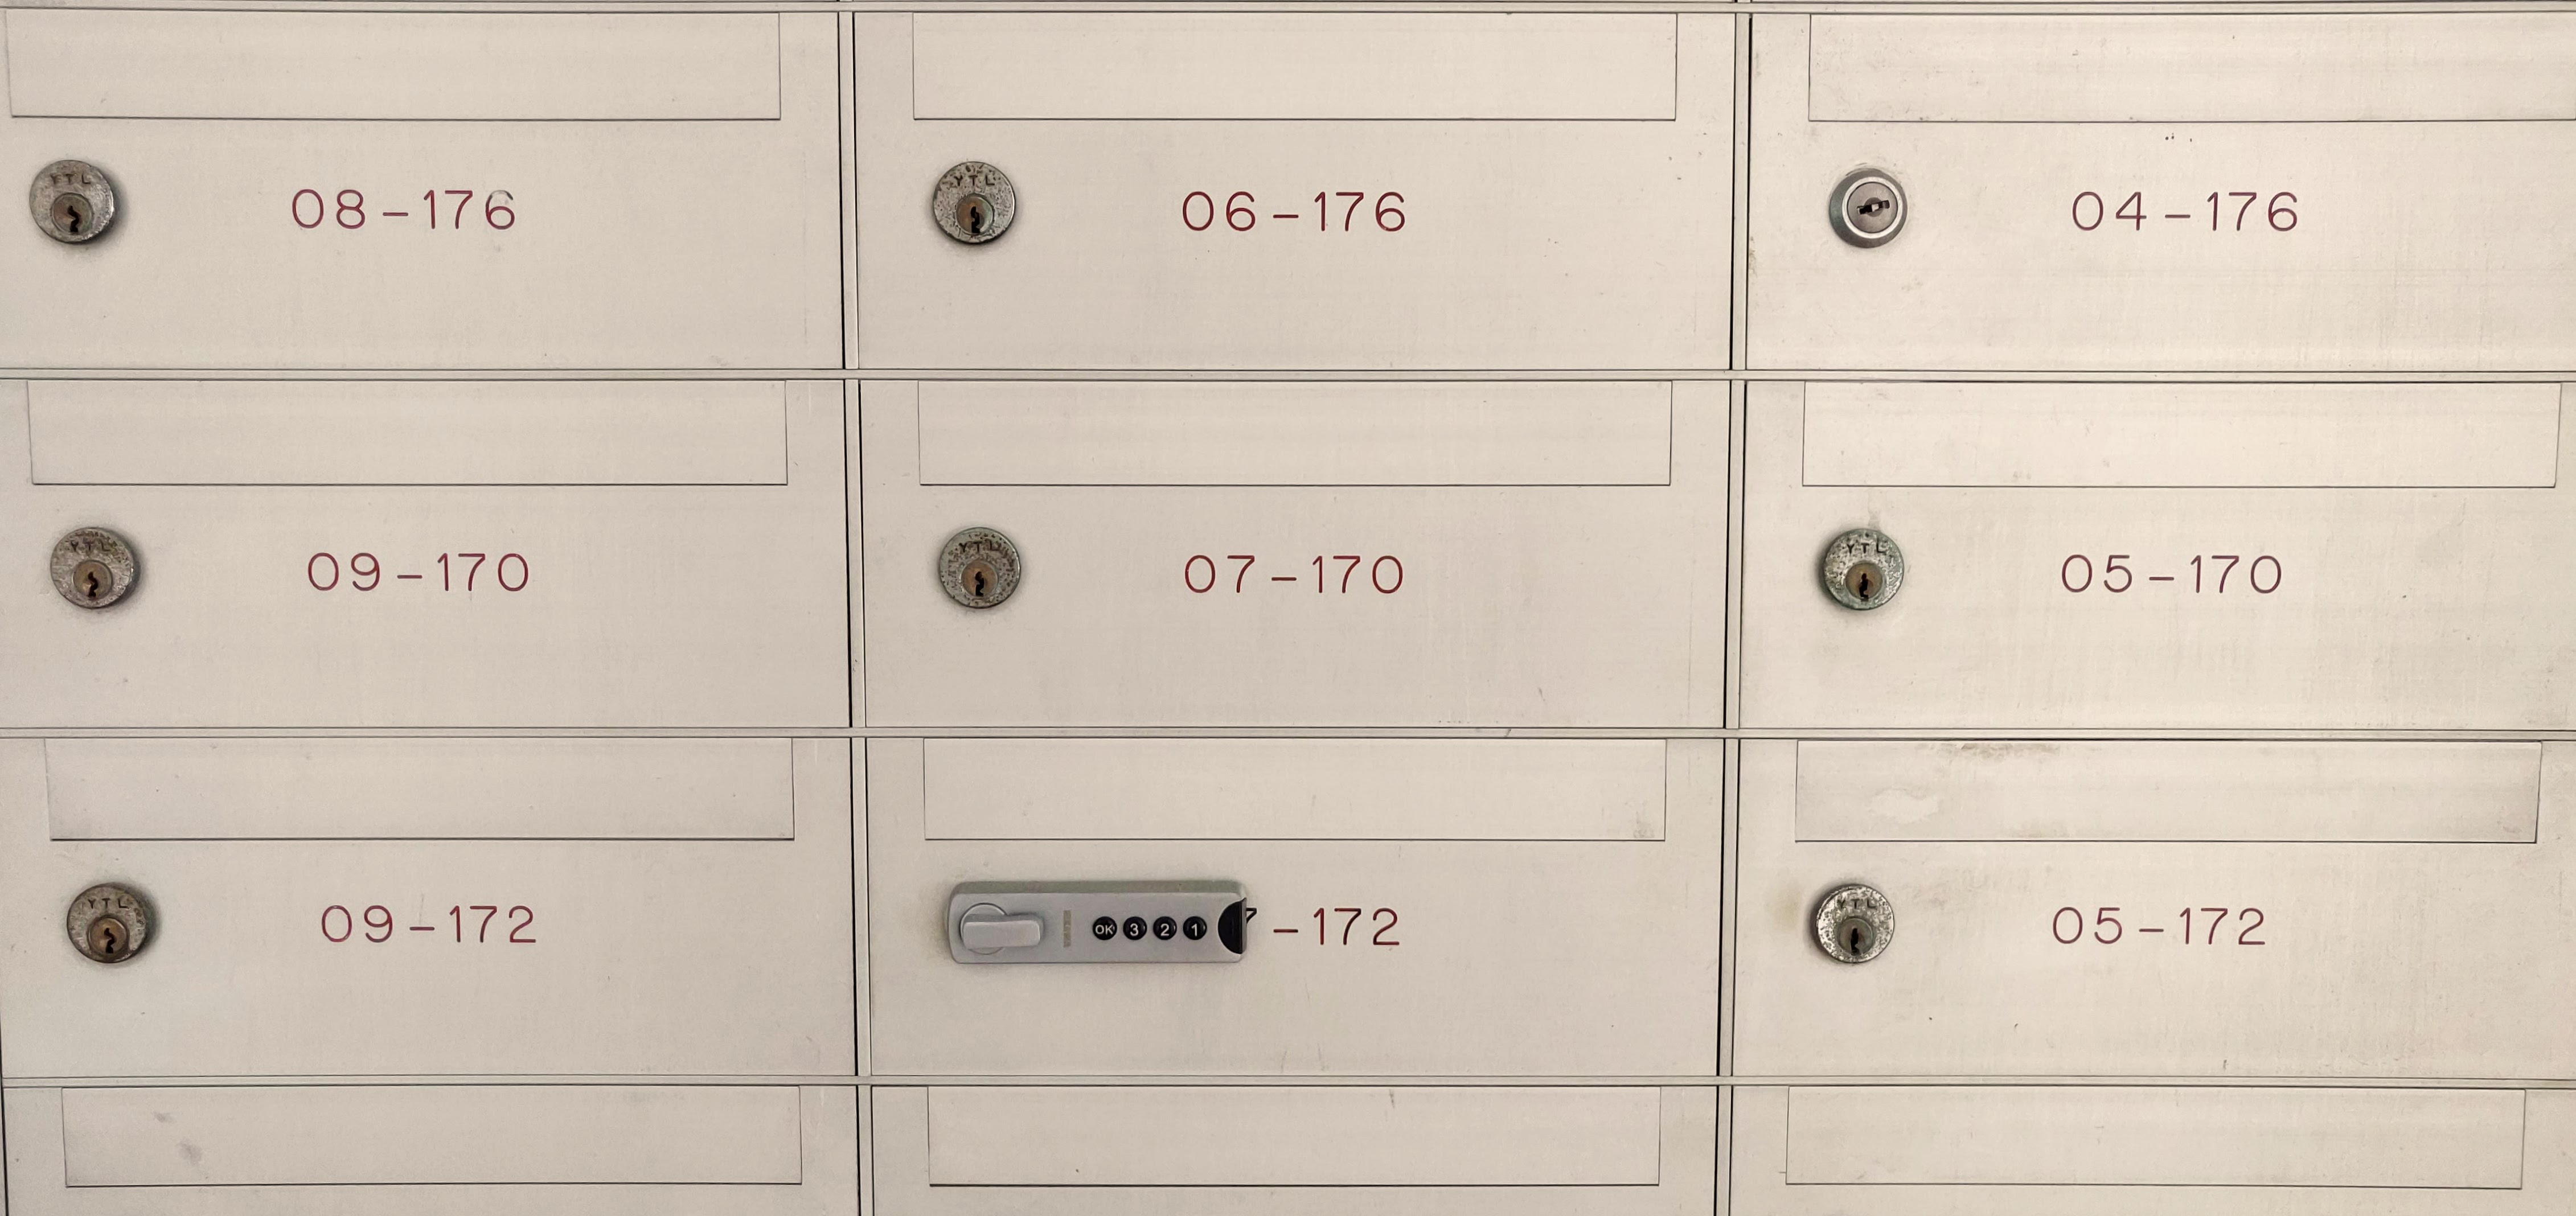 A photo of mailboxes